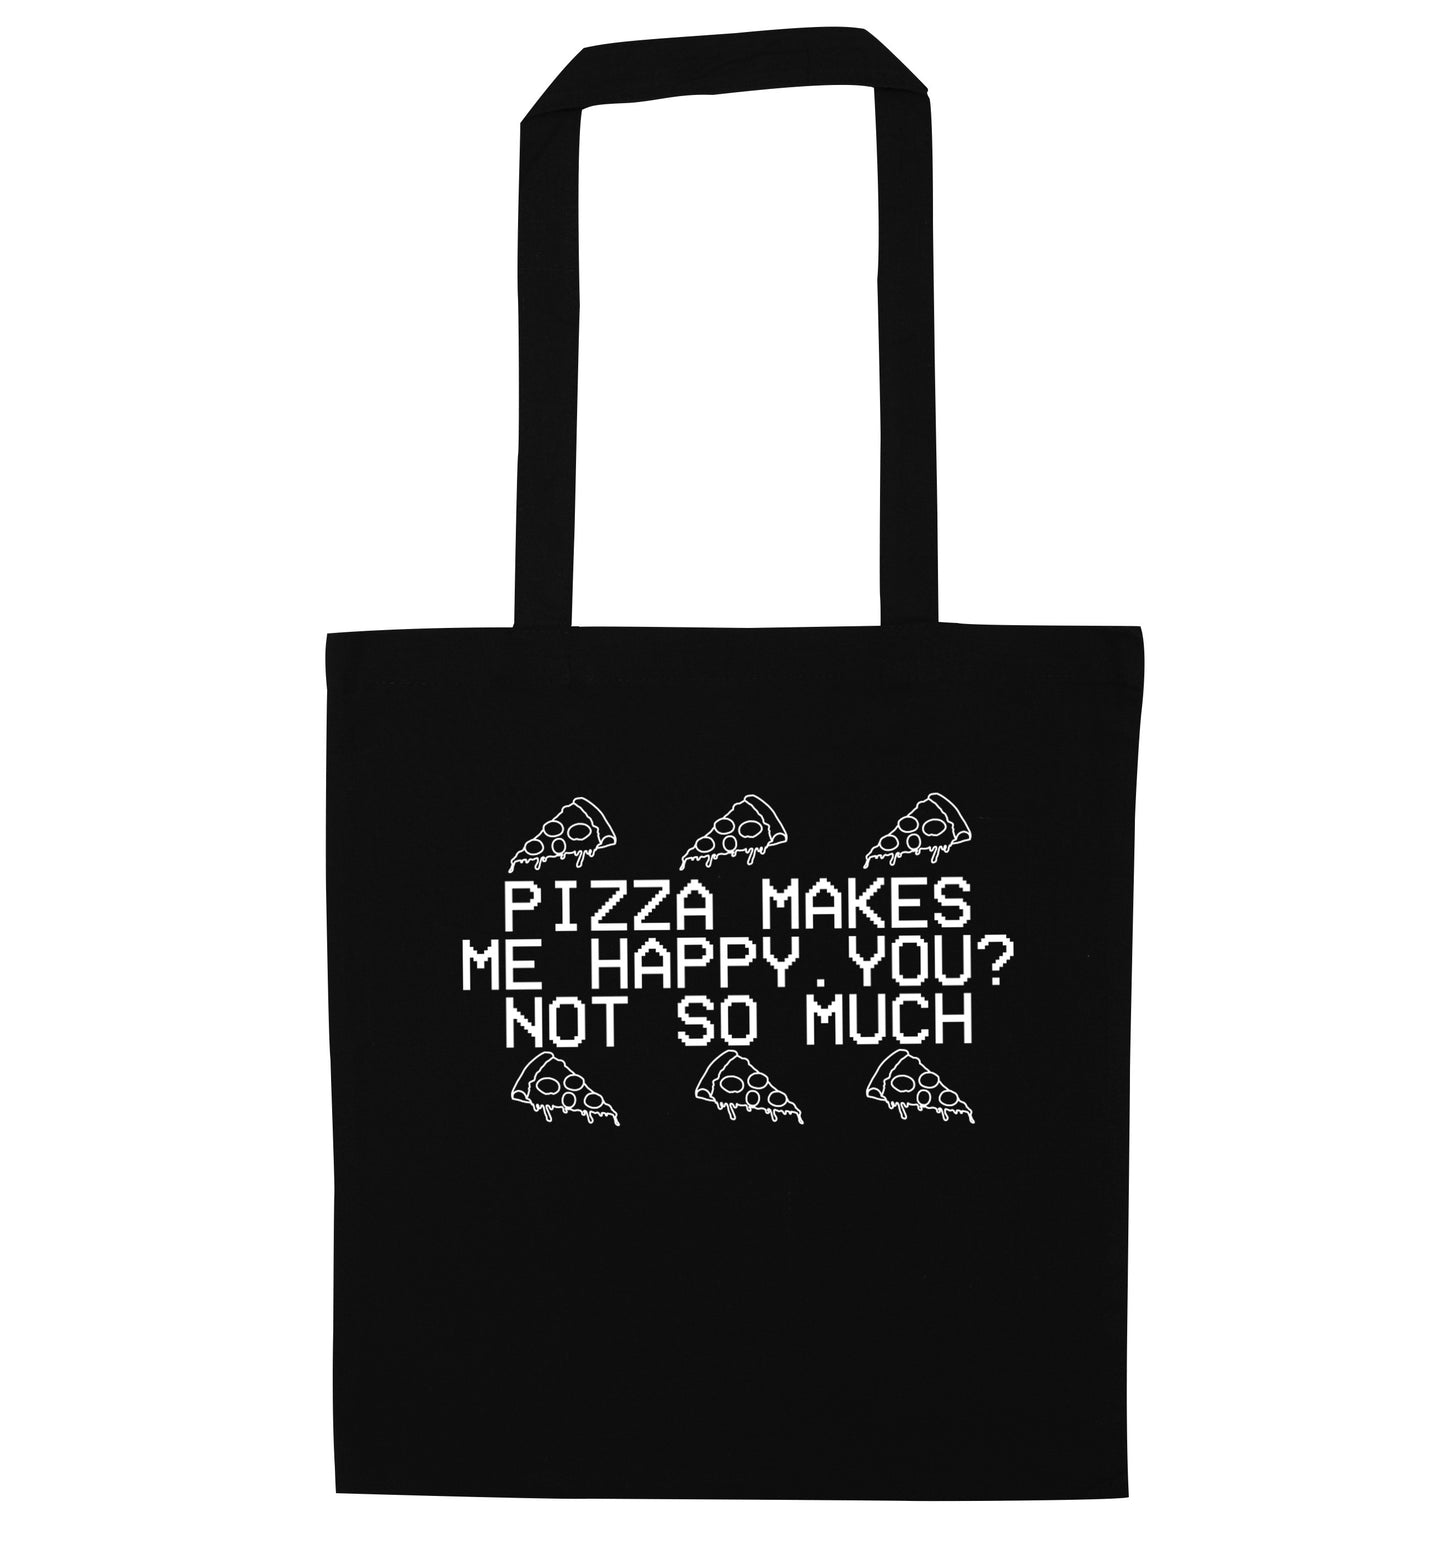 Pizza makes me happy, You? Not so much black tote bag